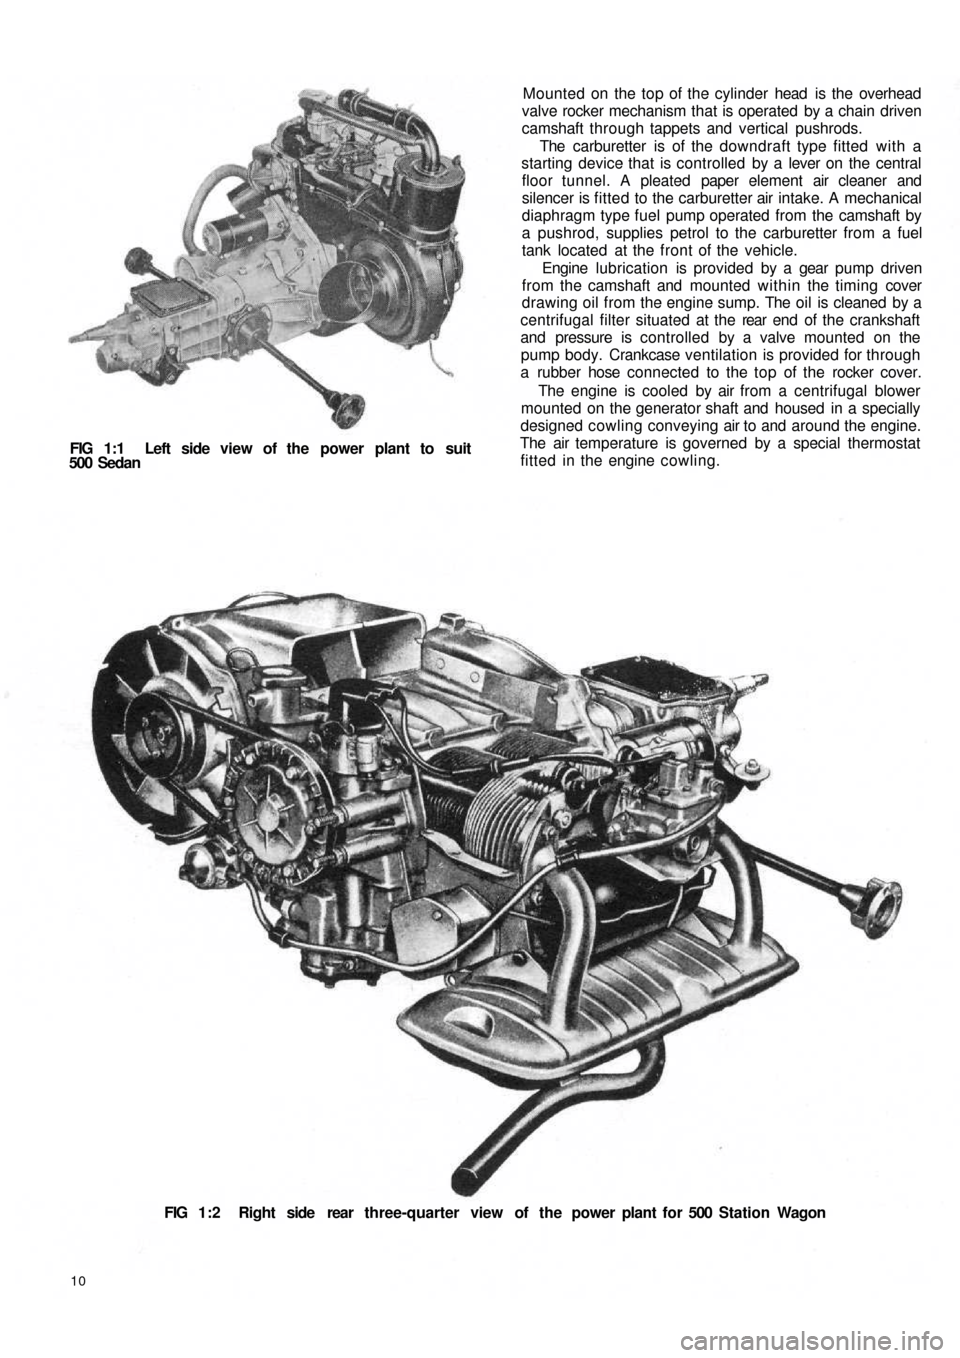 FIAT 500 1964 1.G Workshop Manual FIG 1:1  Left side view of the power plant to suit
500  Sedan
10
FIG 1:2  Right side  rear  three-quarter view of the power plant for 500 Station  Wagon Mounted on the top of the cylinder  head  is th